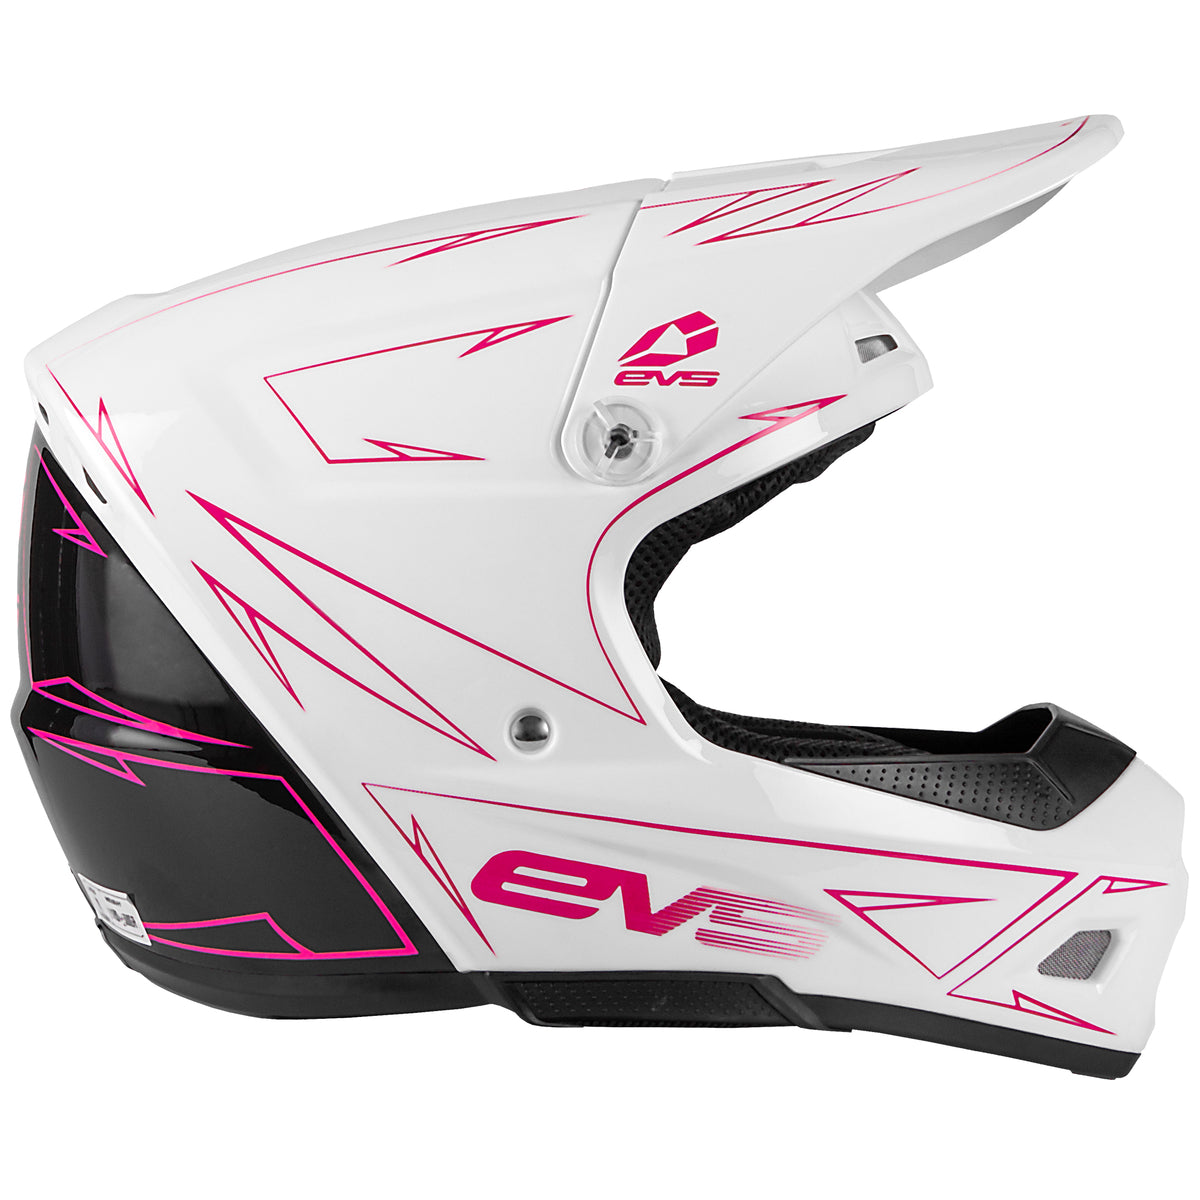 T3 Youth Helmet - 50/Fifty Pink - EVS Sports